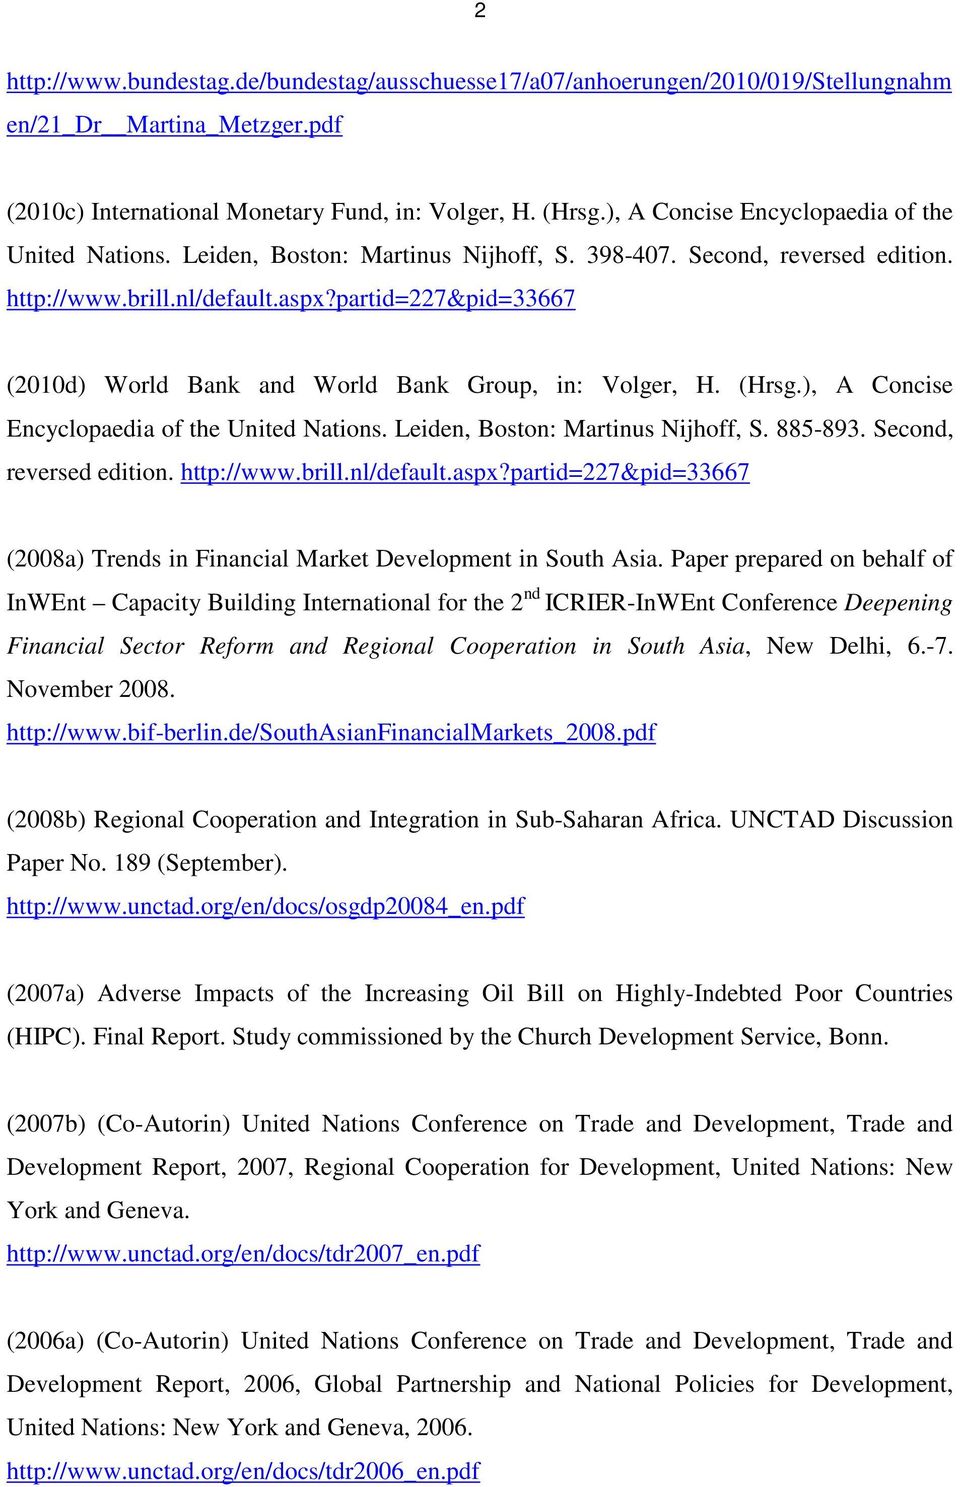 partid=227&pid=33667 (2010d) World Bank and World Bank Group, in: Volger, H. (Hrsg.), A Concise Encyclopaedia of the United Nations. Leiden, Boston: Martinus Nijhoff, S. 885-893.